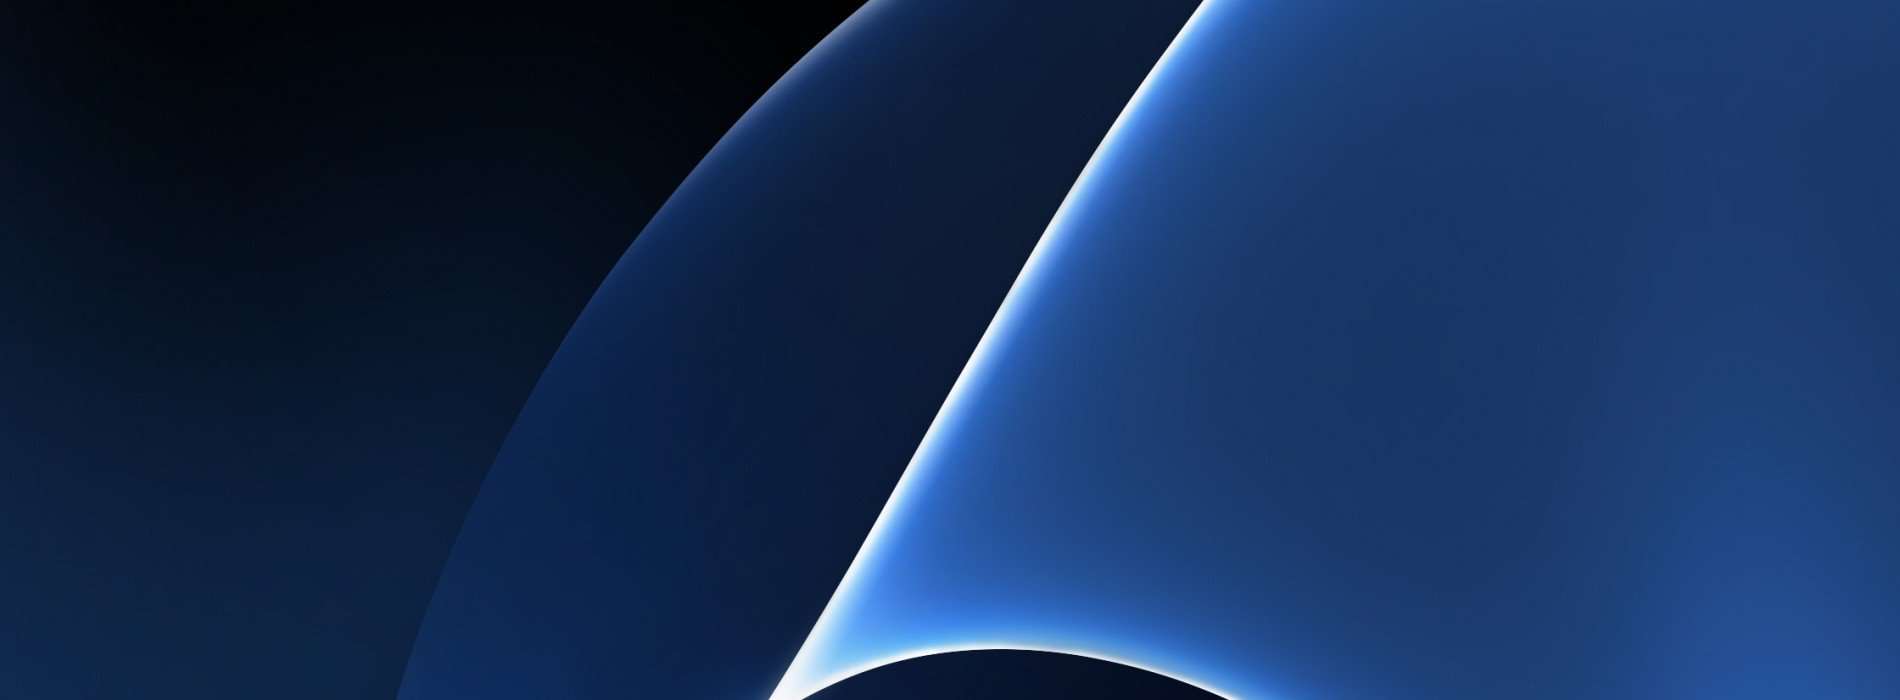 Here Are The Official Samsung Galaxy S7 And Edge Wallpaper